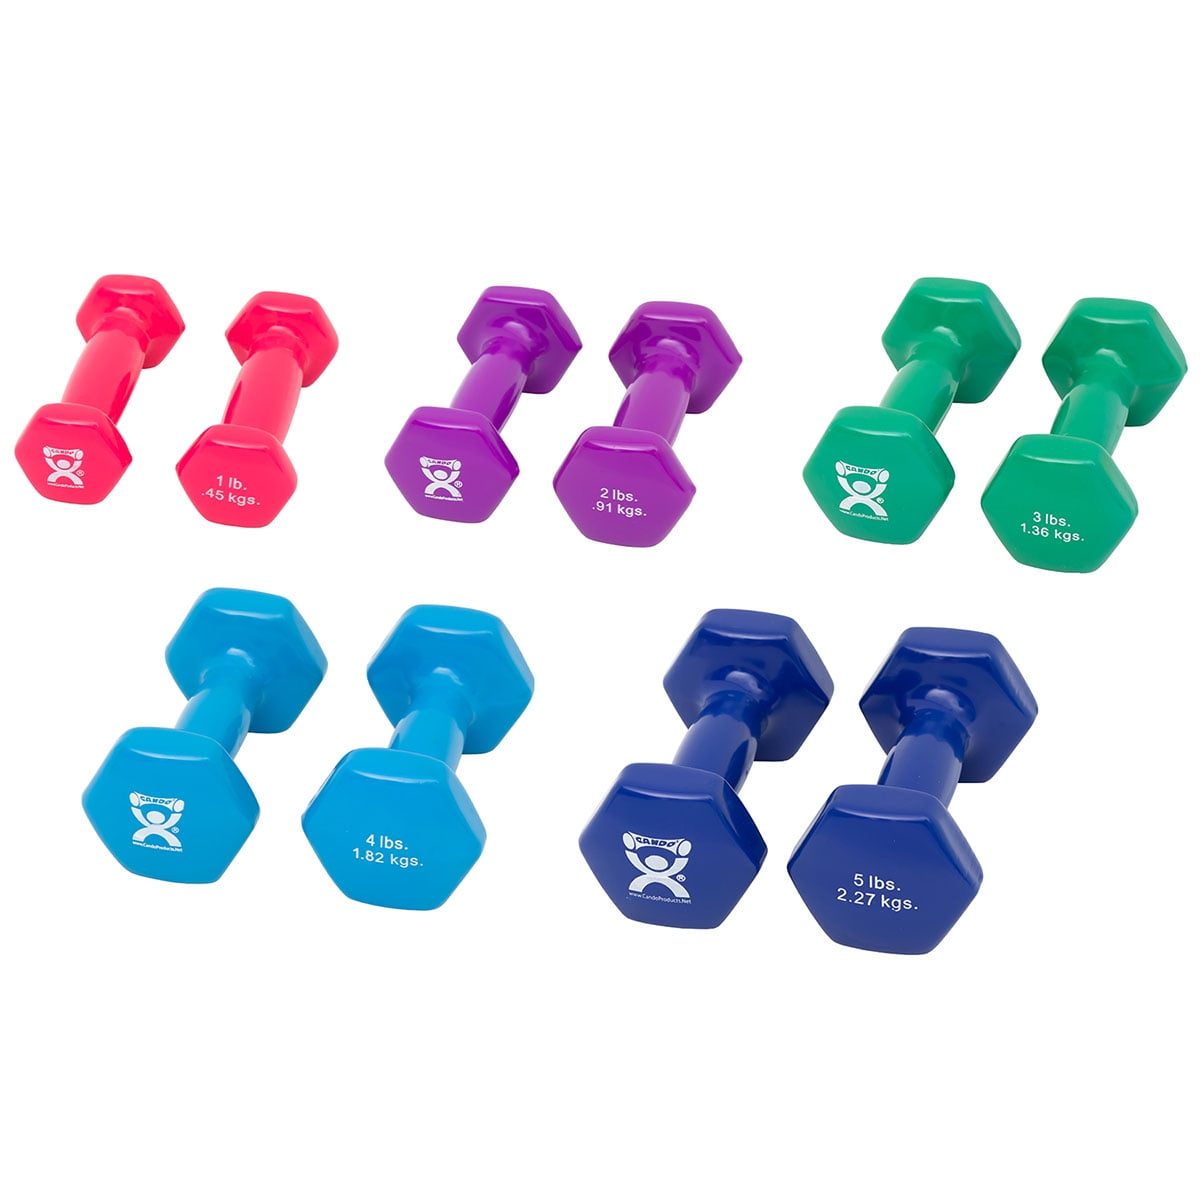 6 3 2 5 9,10 KG PAIRS Exersci Hex Neoprene Dumbbell Soft Touch 1 7 8 4 